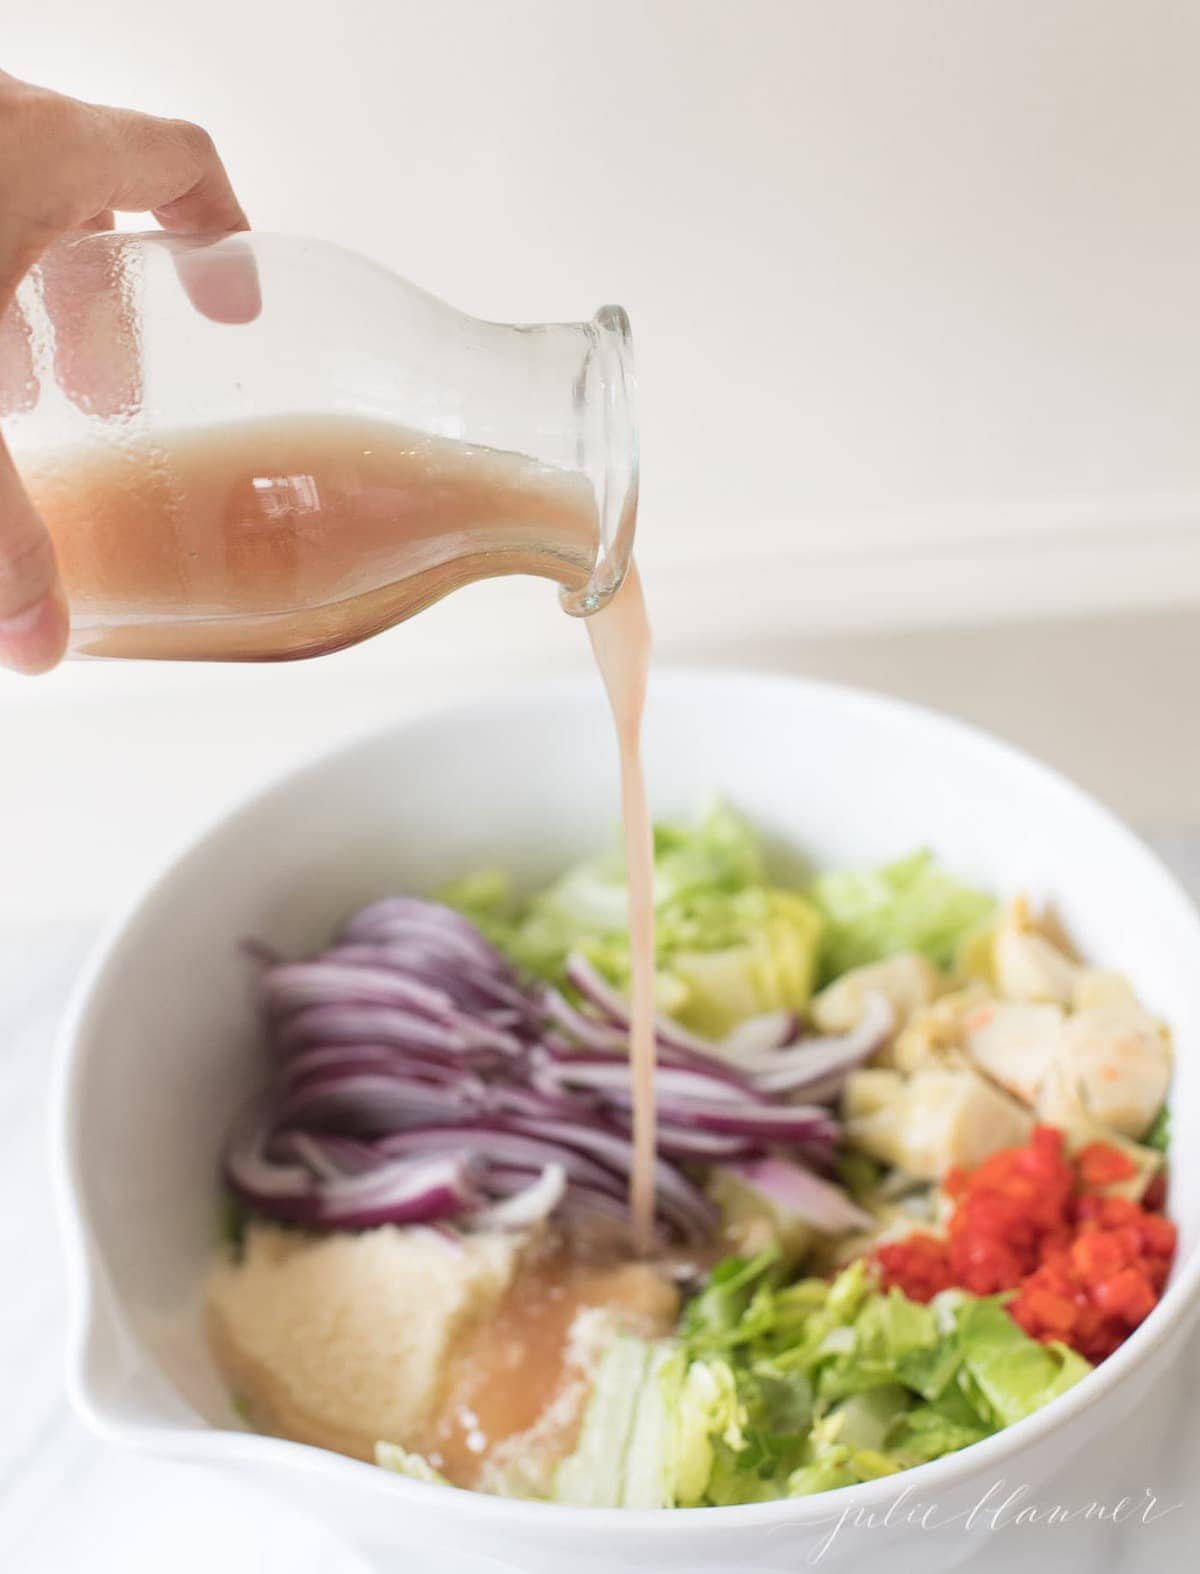 red wine vinaigrette being poured over salad